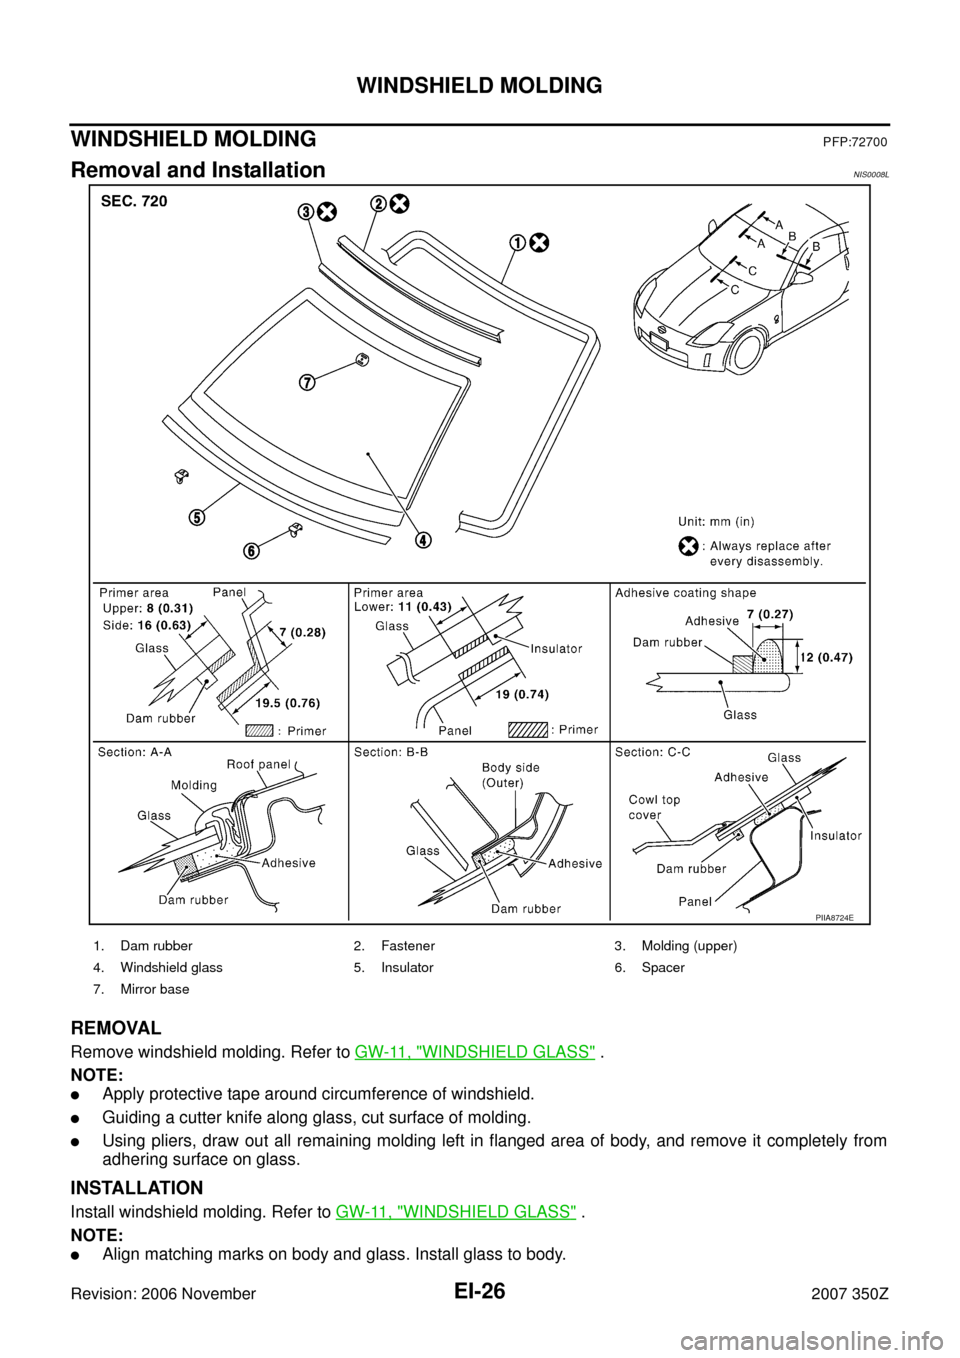 NISSAN 350Z 2007 Z33 Exterior And Interior Workshop Manual EI-26
WINDSHIELD MOLDING
Revision: 2006 November2007 350Z
WINDSHIELD MOLDINGPFP:72700
Removal and InstallationNIS0008L
REMOVAL
Remove windshield molding. Refer to GW-11, "WINDSHIELD GLASS" .
NOTE:
Ap